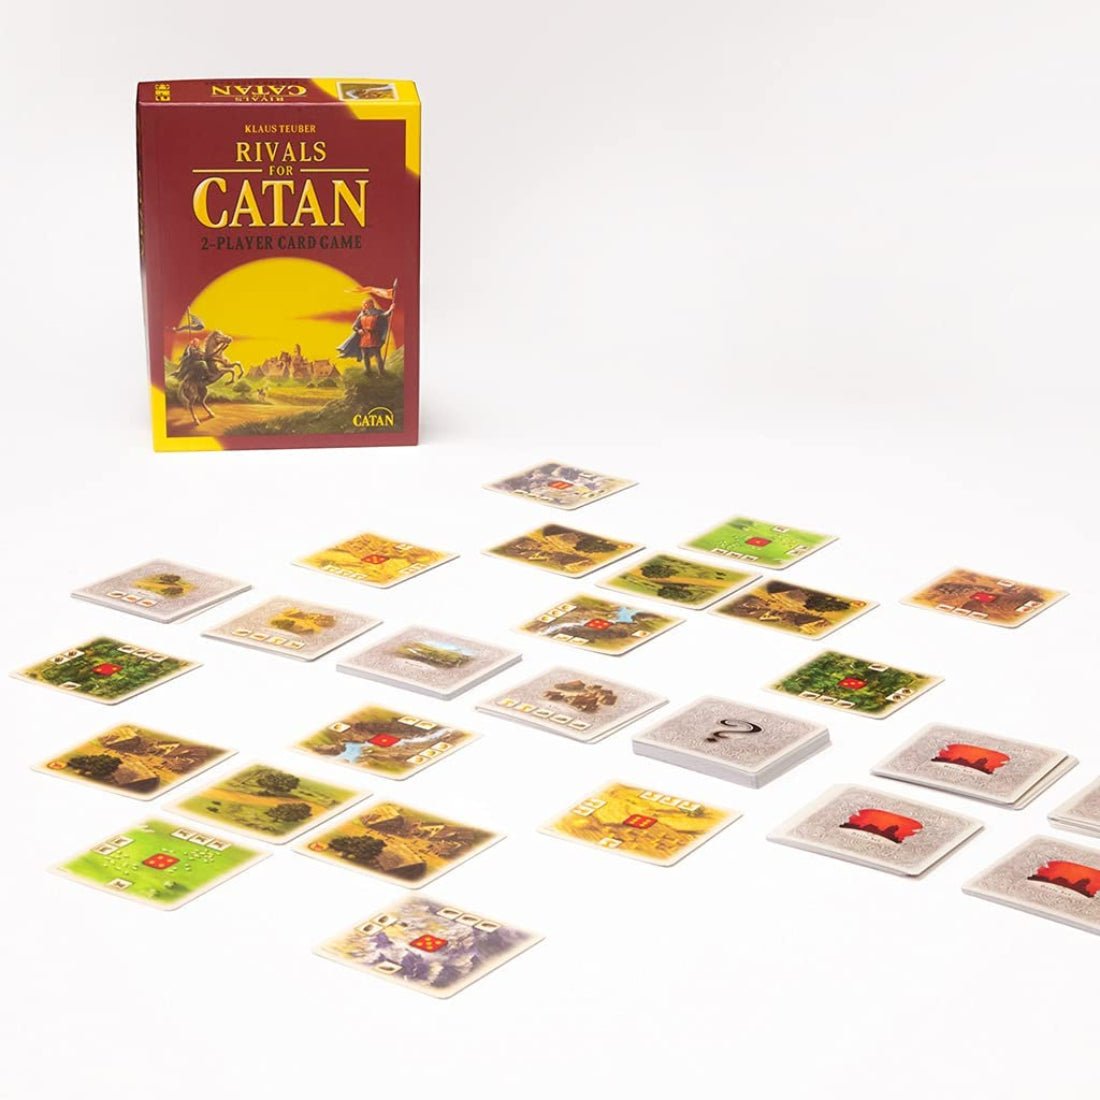 Rivals for Catan: 2 Player Card Game - لعبة - Store 974 | ستور ٩٧٤